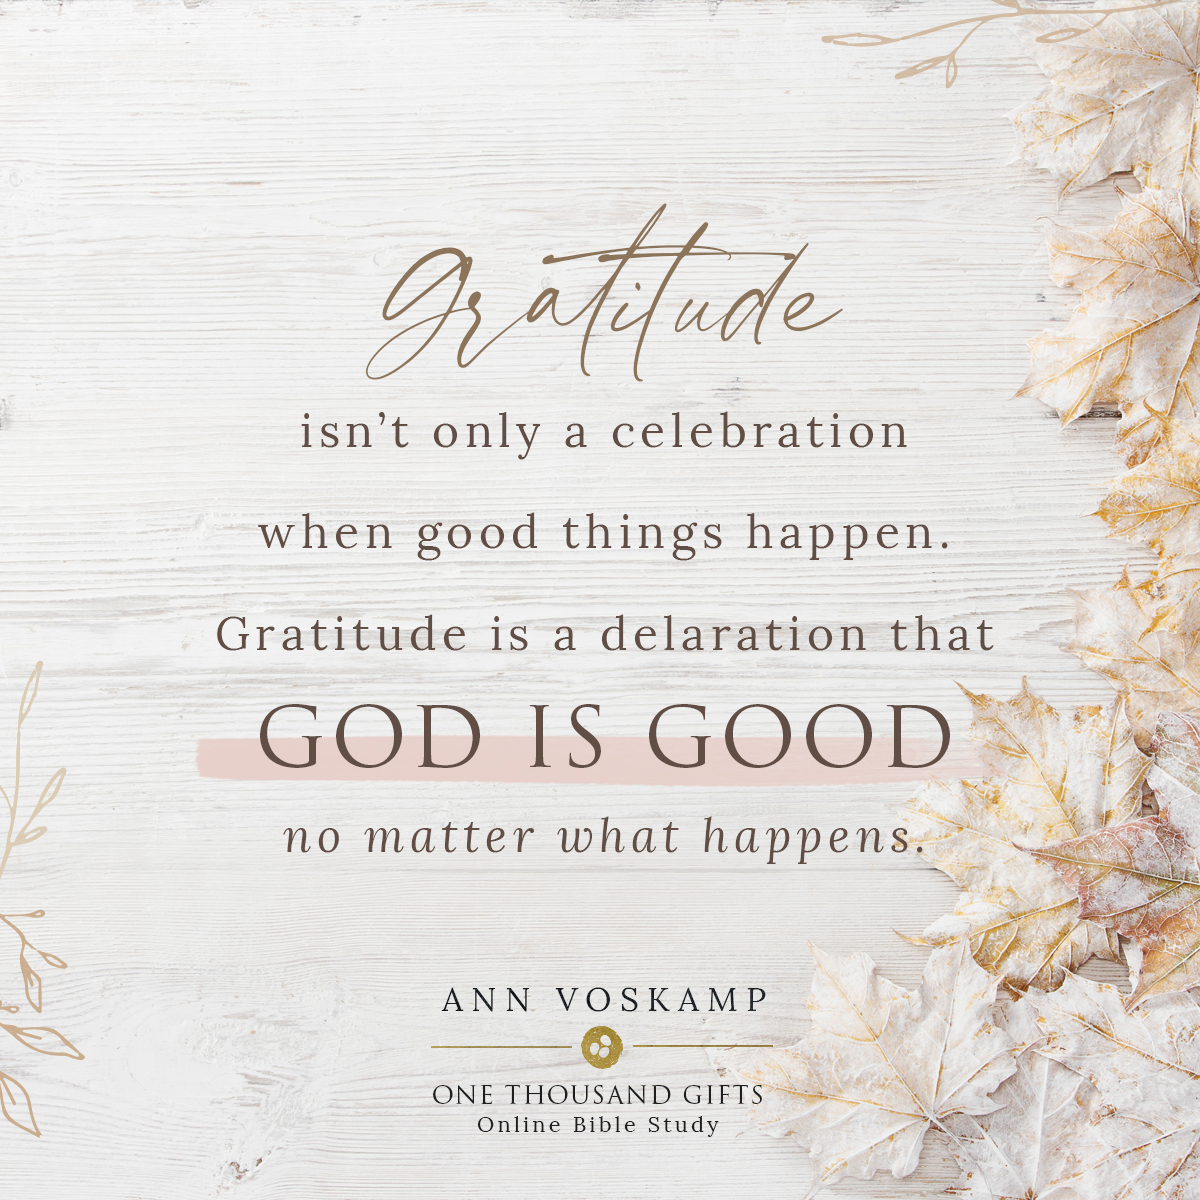 One Thousand Gifts OBS Week 1 — Attitude of Gratitude